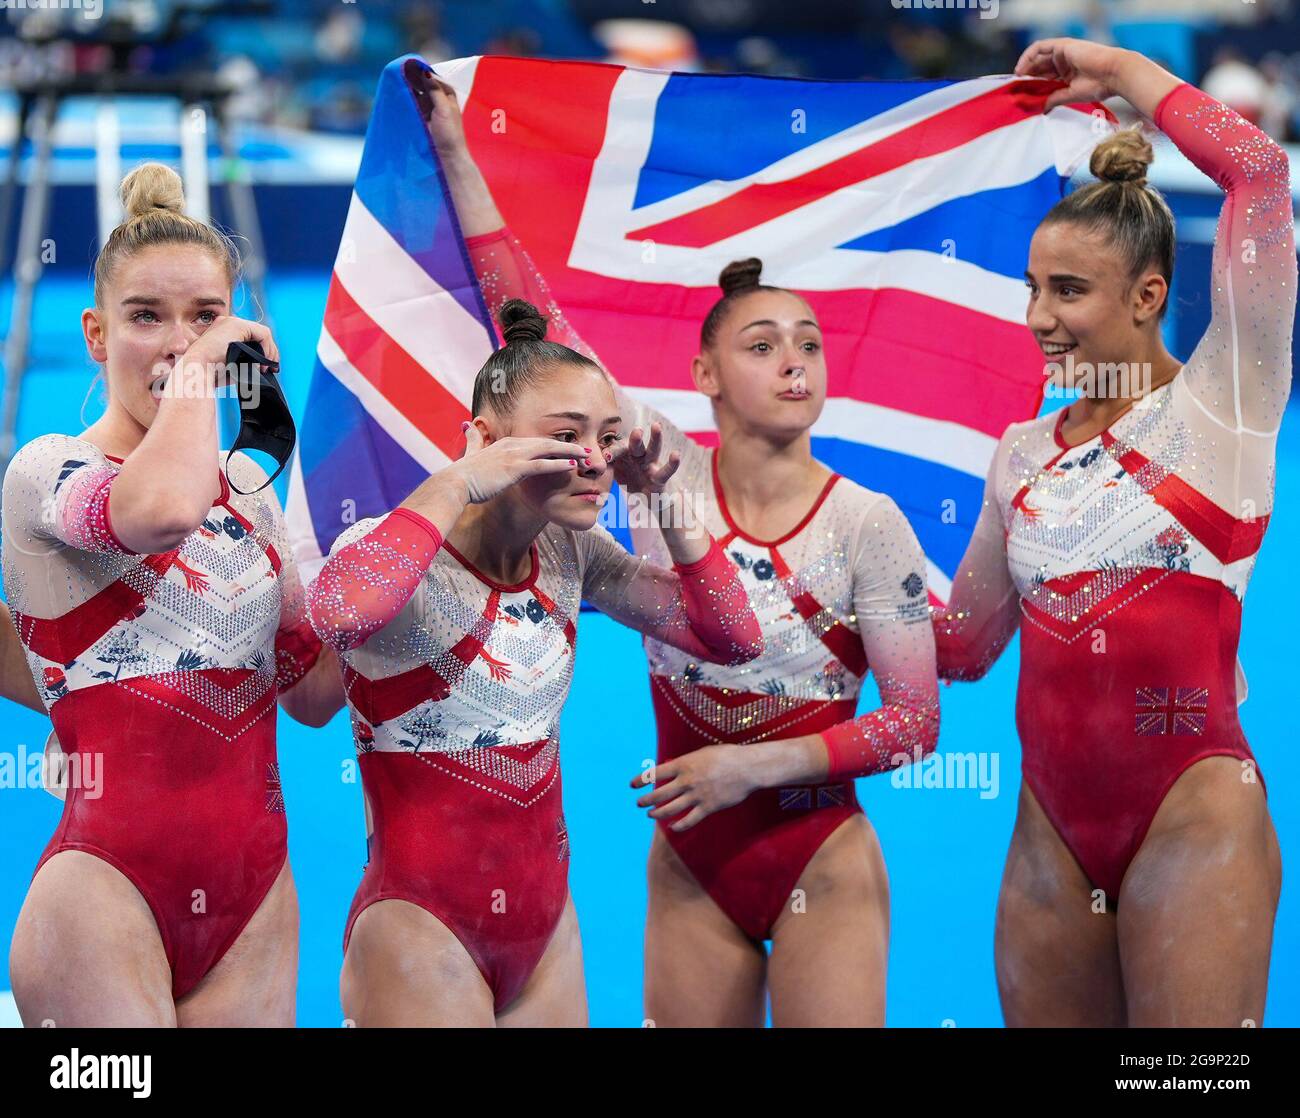 Arlake Gymnastics Center Tokyo Japan 27th July 21 Womens Team Artistic Gymnastics Day 4 Of Tokyo Summer Olympic Games Tears Of Joy For Team Gb As They Win Bronze Medal Jessica